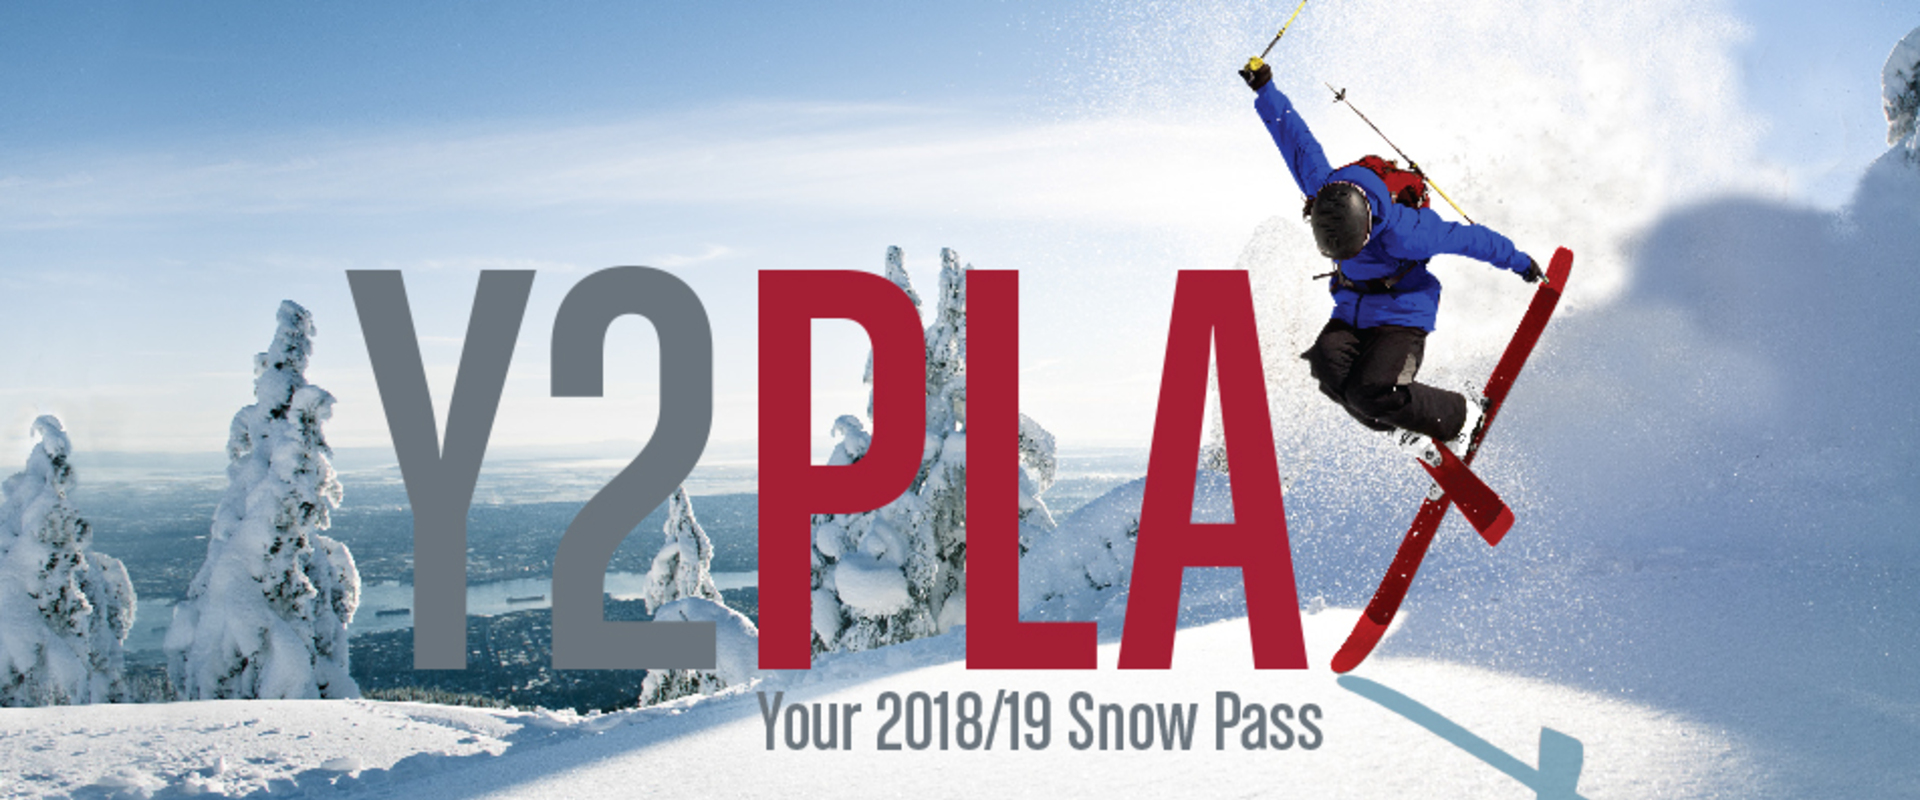 Y2Play is the North Shore's best value Snow Pass.